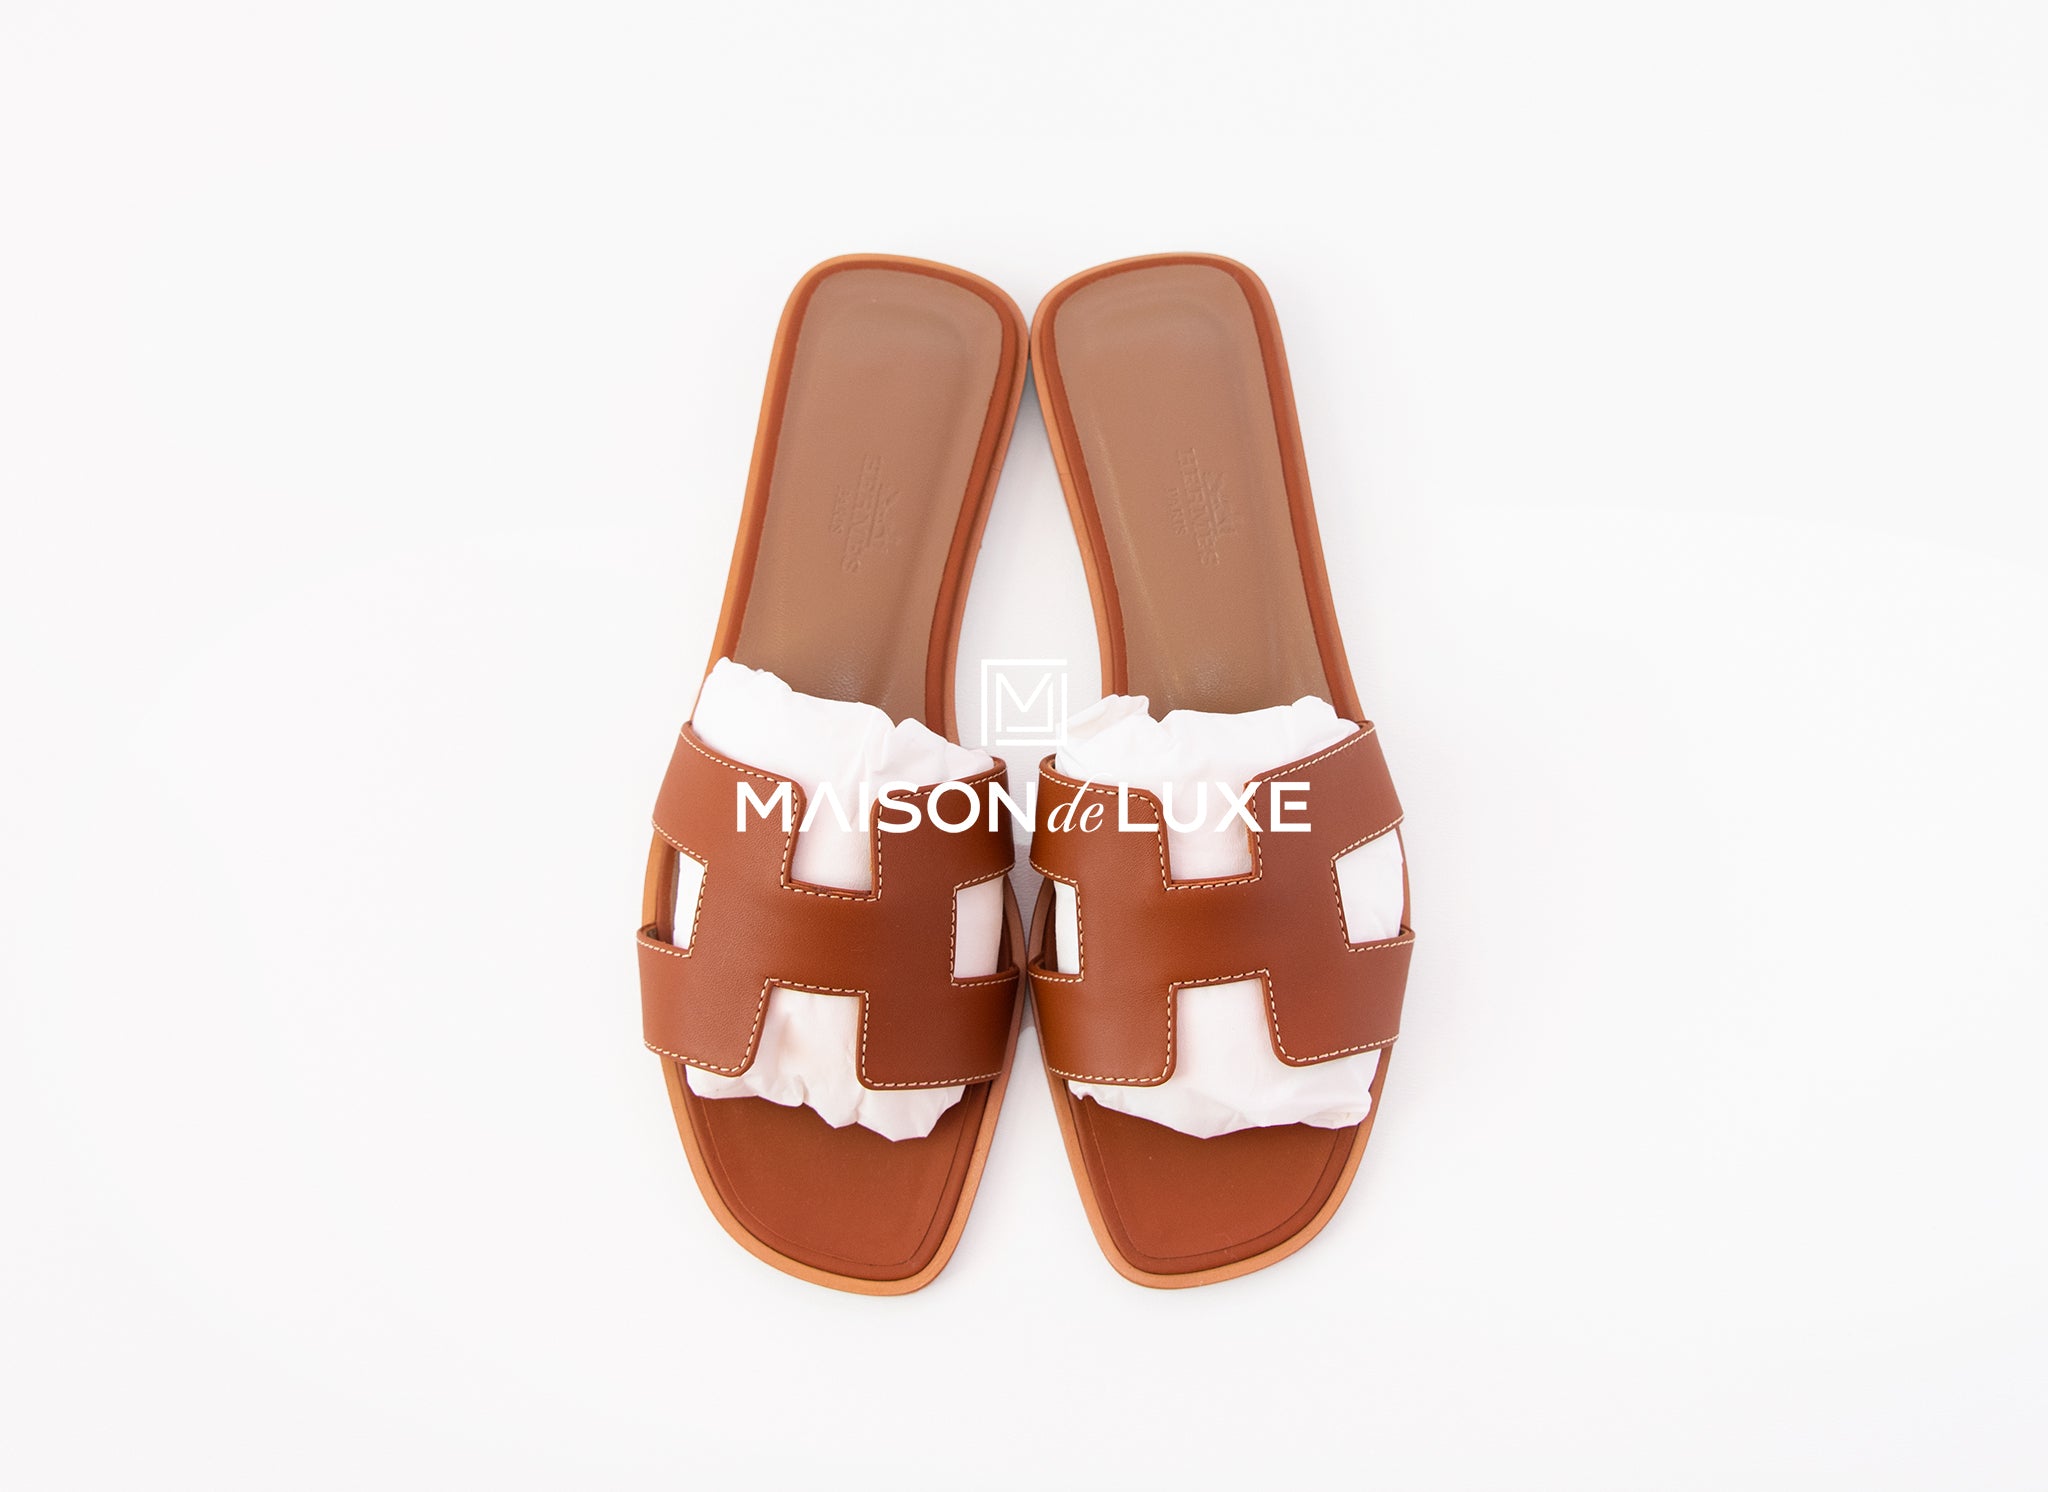 Oran Hermès (Rouge H)  Girly shoes, Hermes shoes, Fashion slippers